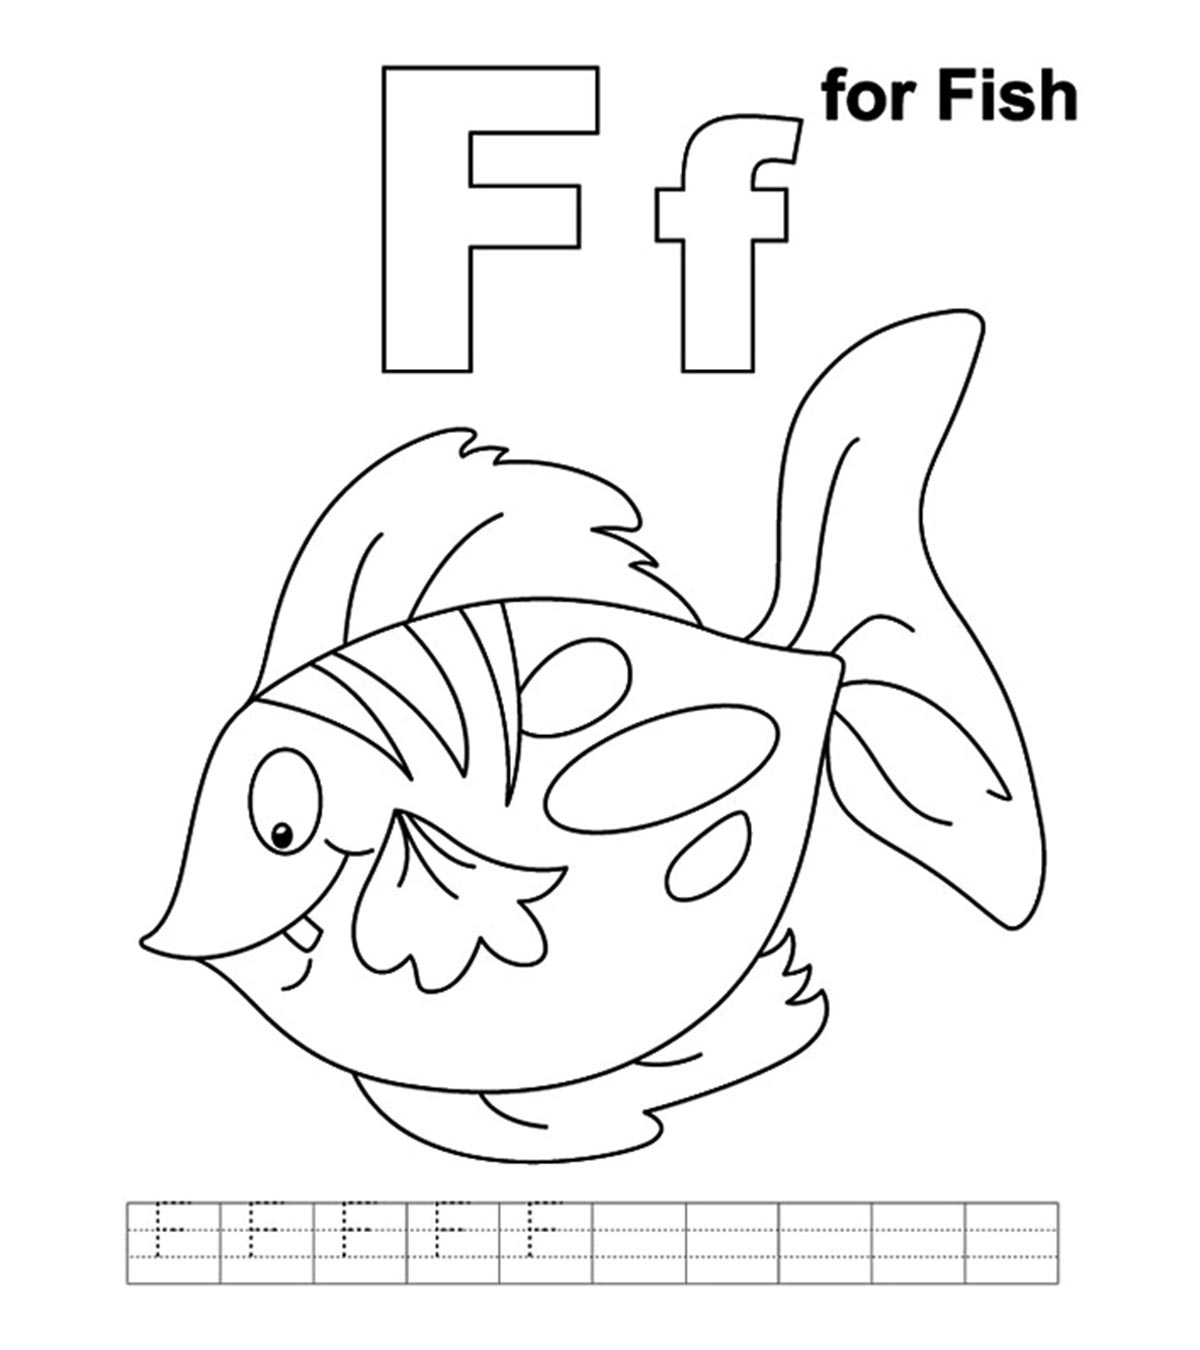 Top 25 Fish Coloring Pages For Your Little Ones_image